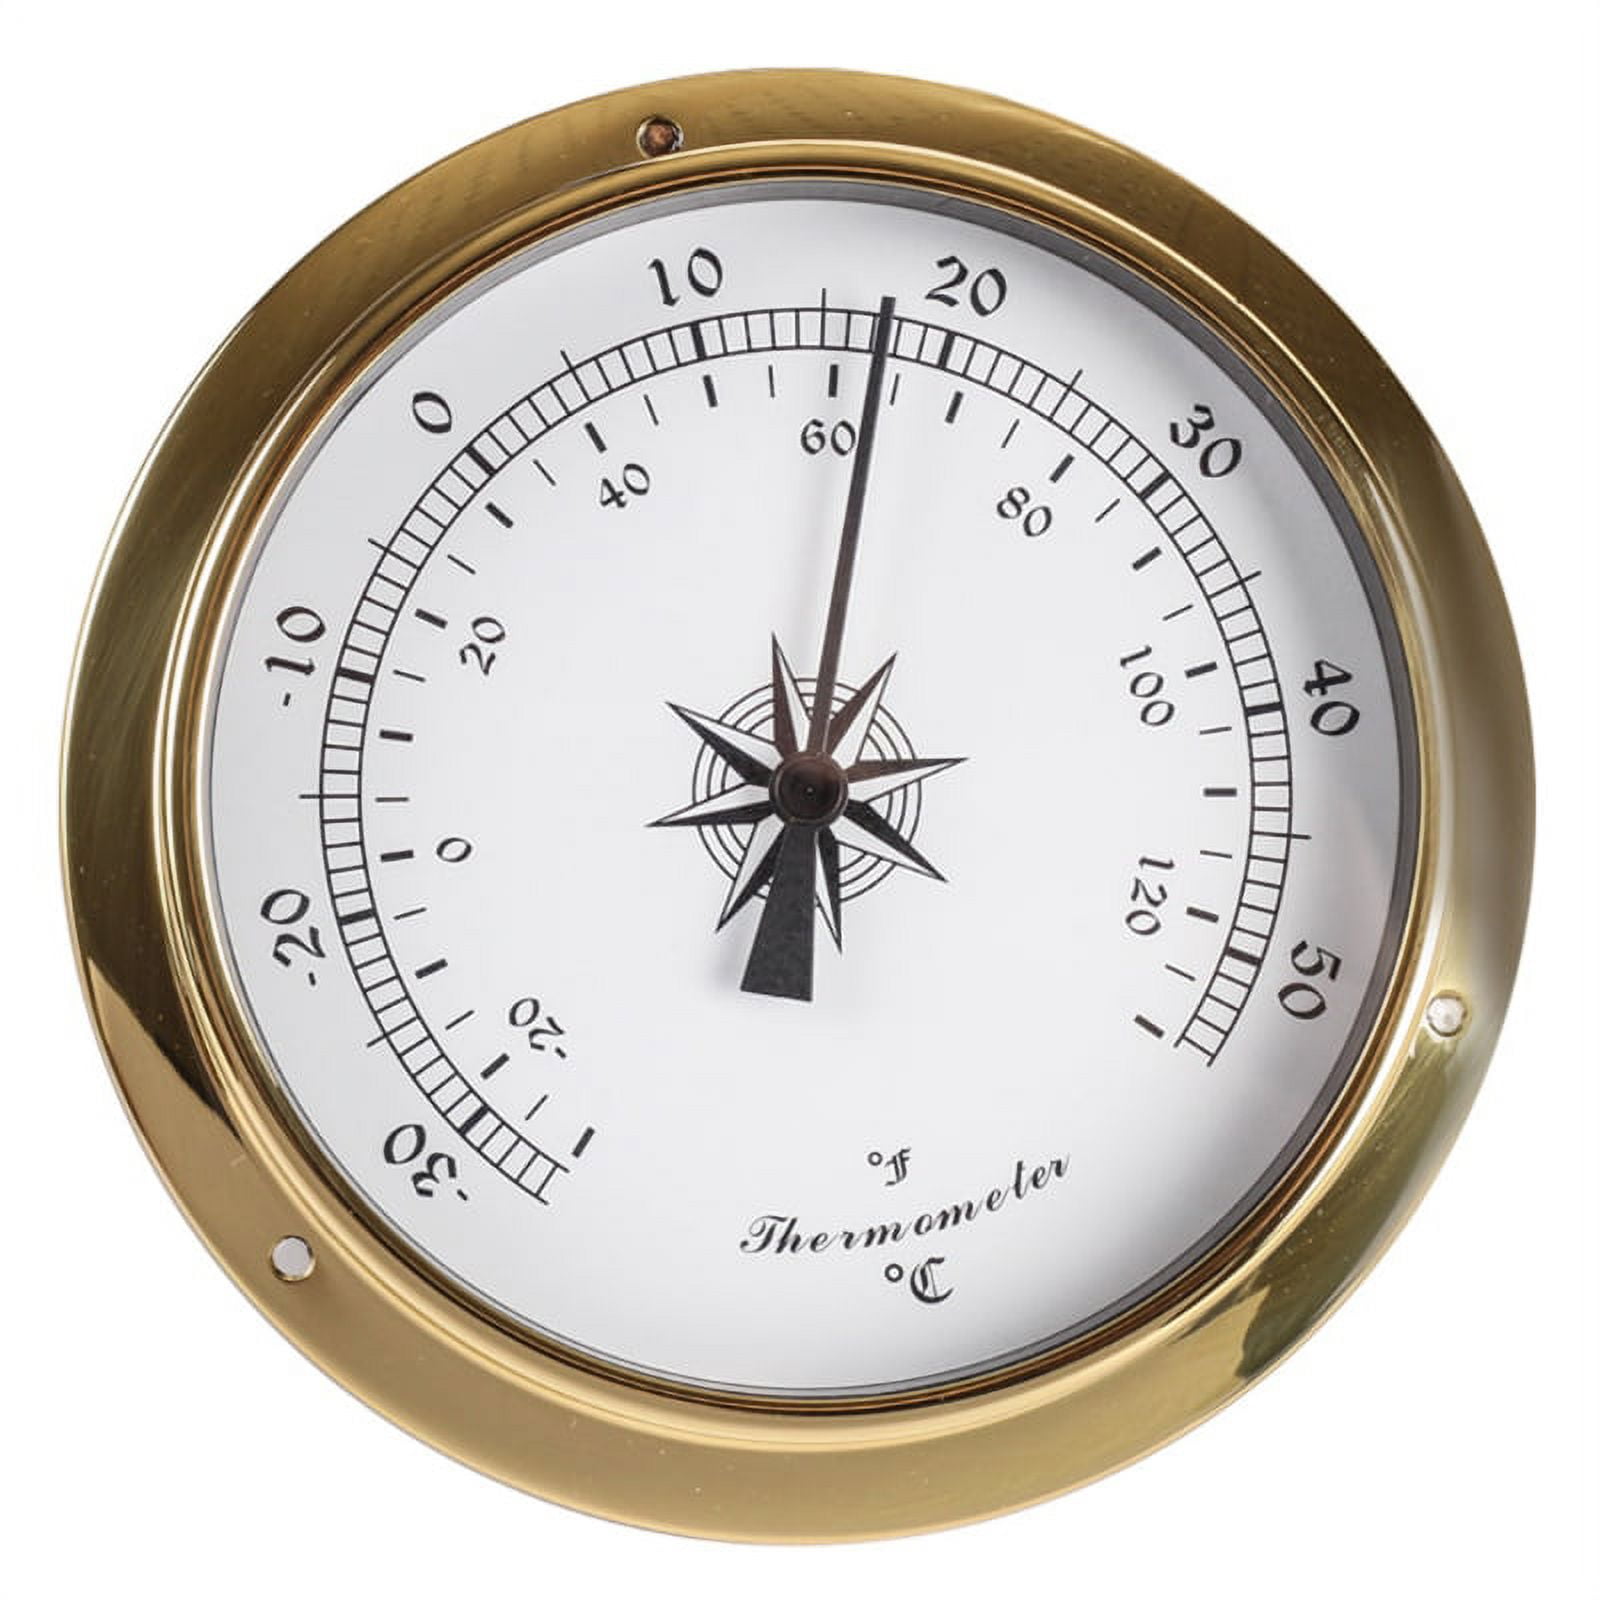 OOKWE 115mm Wall Mounted Thermometer Hygrometer Barometer Watch